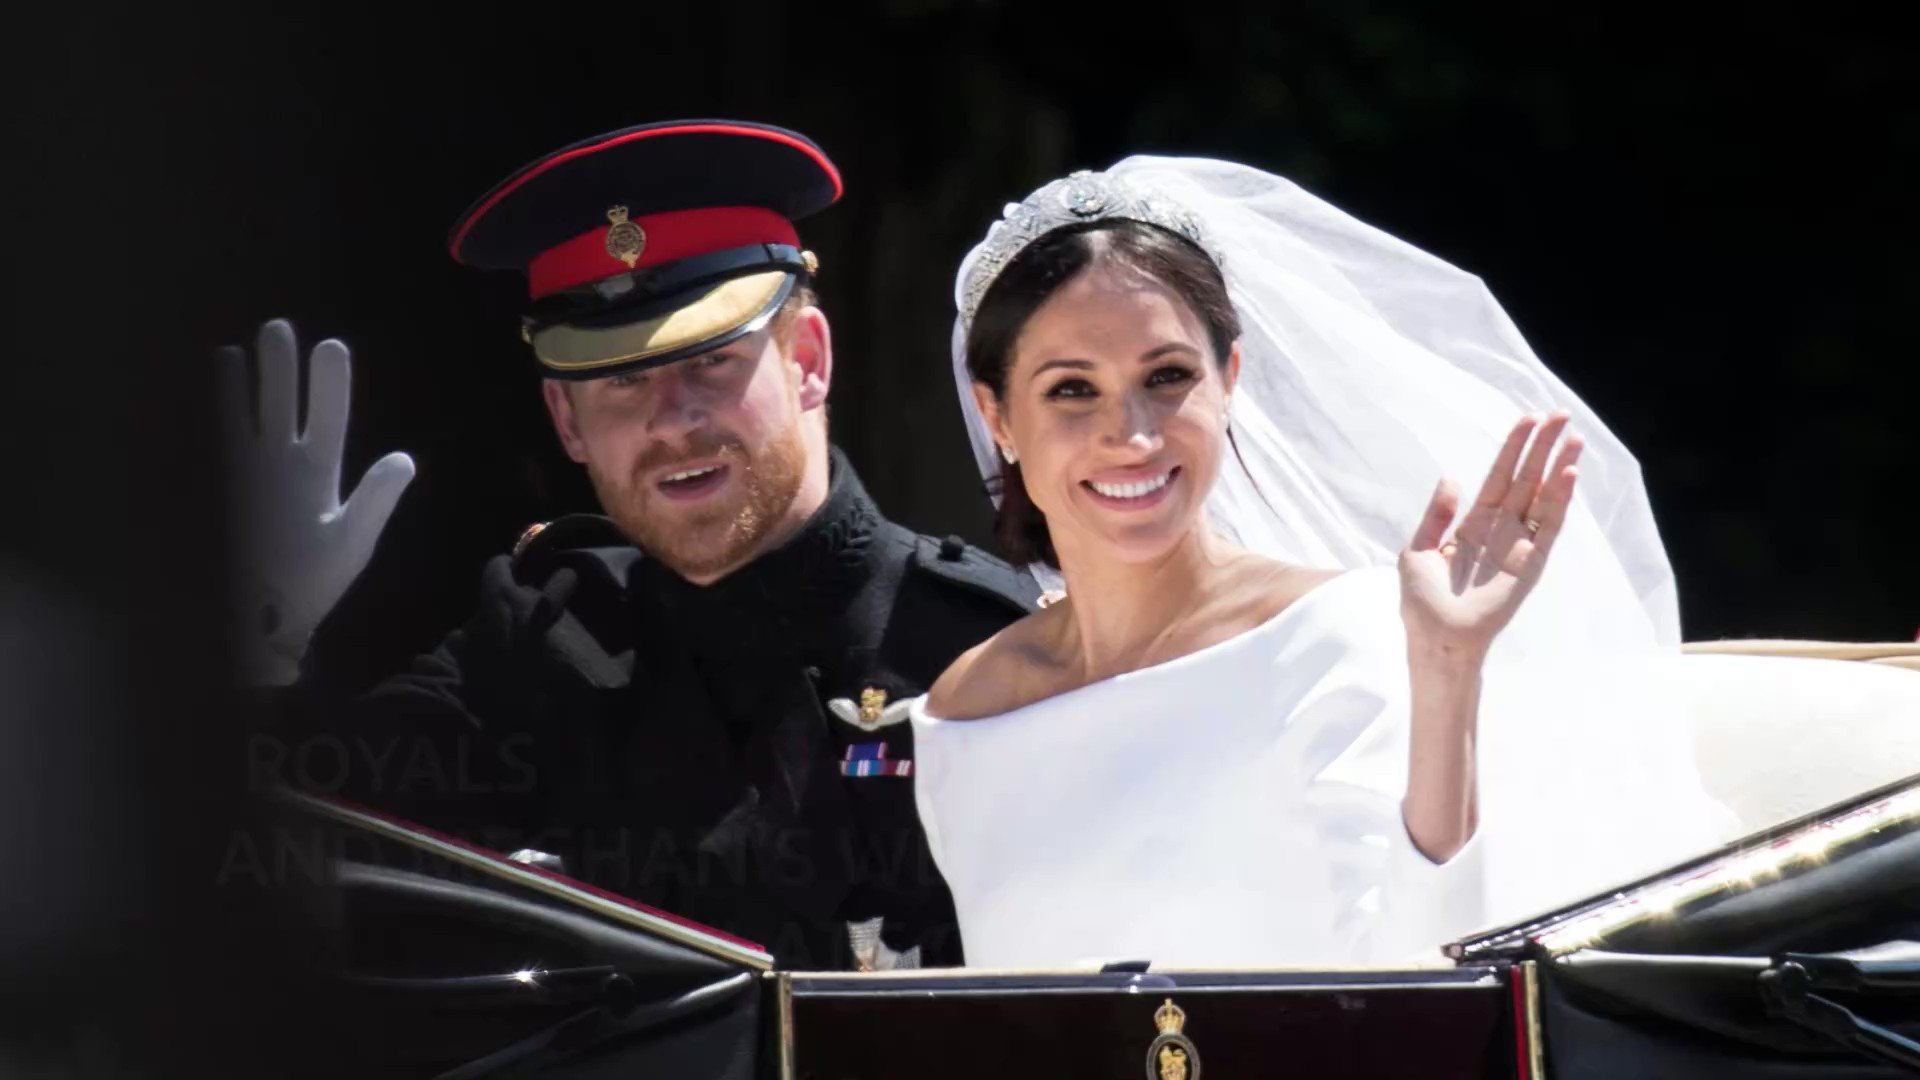 Millions watched on as Prince Harry and Meghan Markle's wedding ceremony was beamed across the world back in 2018. And one notable moment from the glamorous event was the a 14-minute sermon on the power of love.